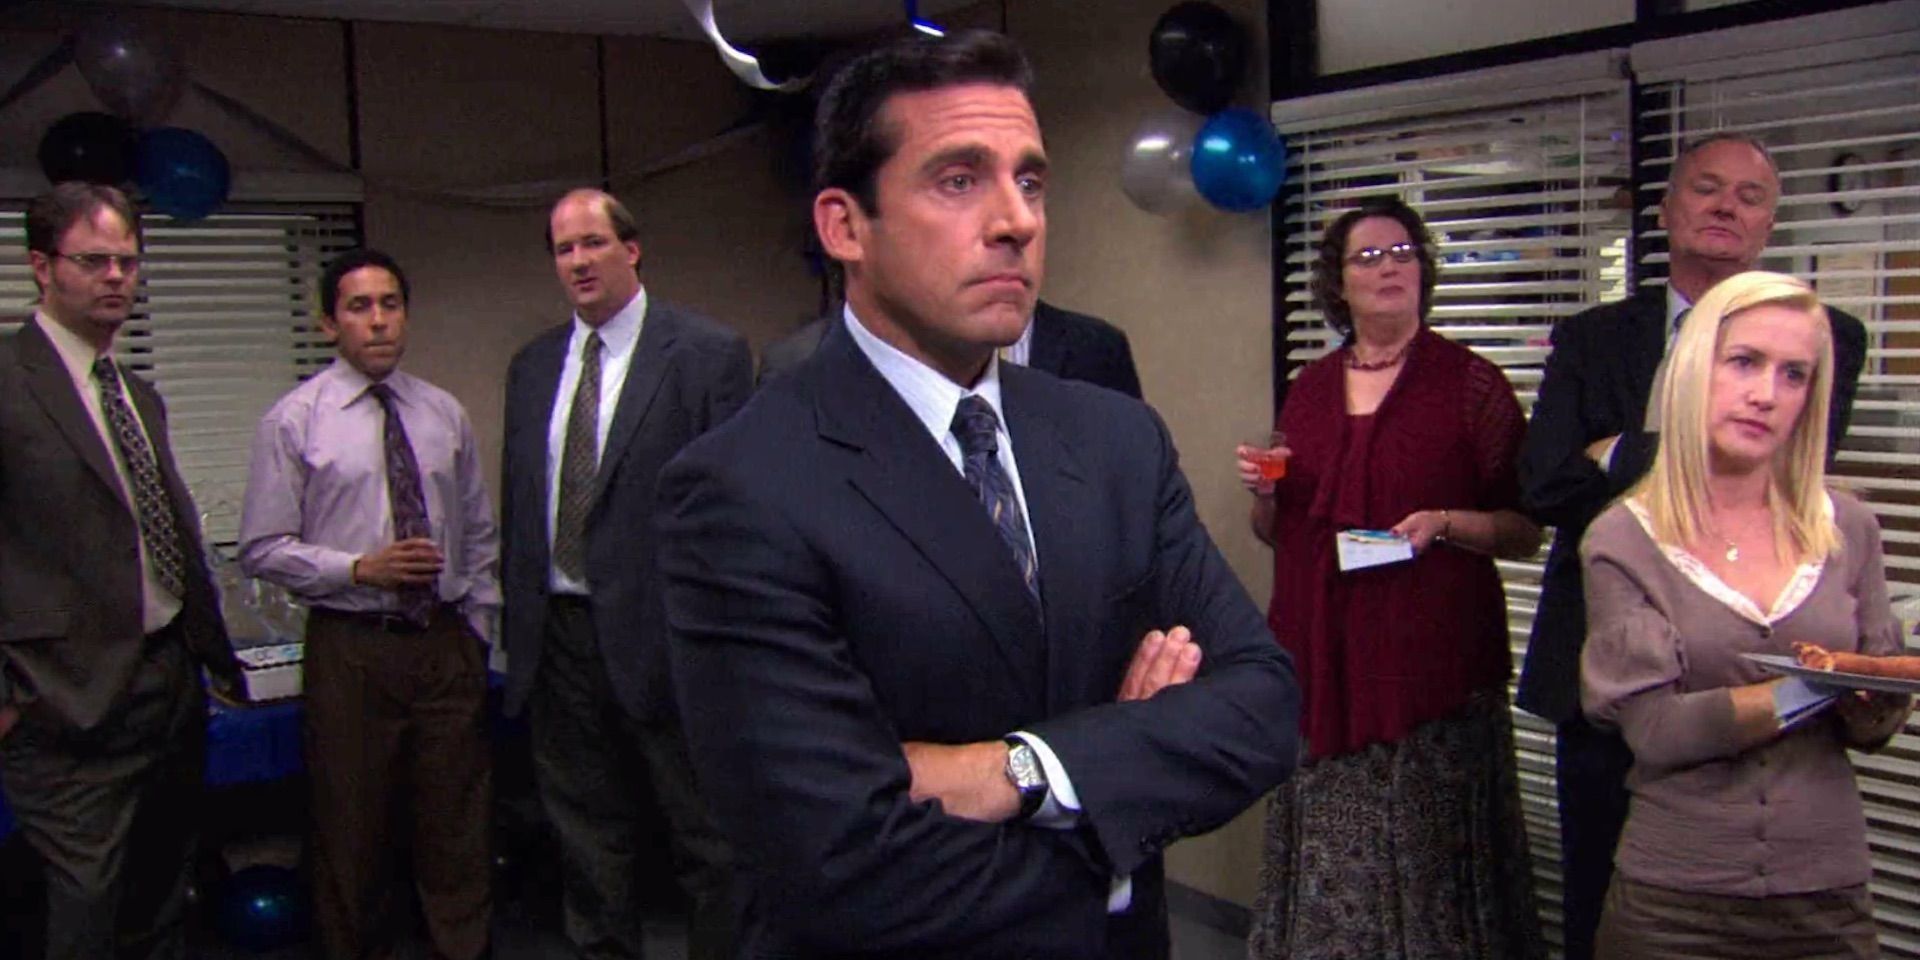 The Office 5 Ways Dunder Mifflin Is The Best Company To Work For (& 5 Ways Its Sabre)